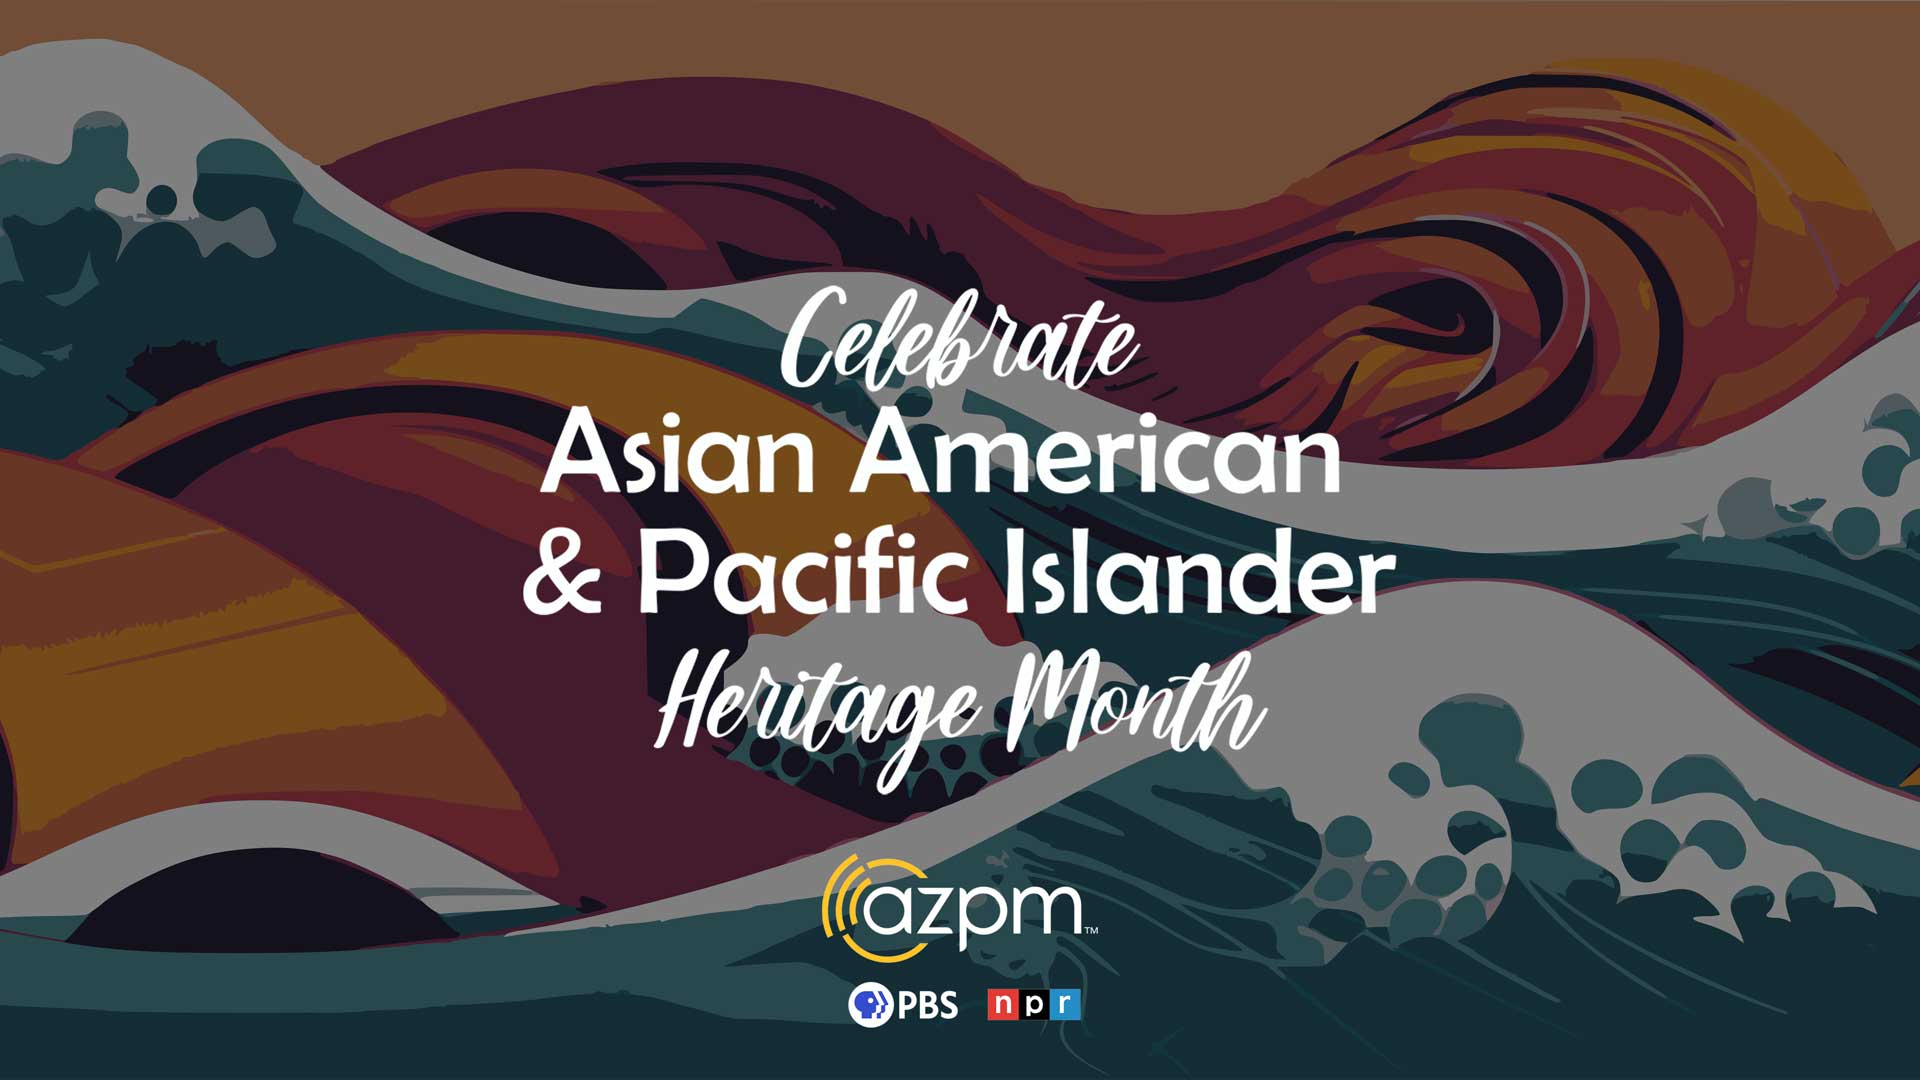 May is Asian American Pacific Islander (AAPI) also called Asian American, Native Hawaiian, and Pacific Islander (AANHPI) Heritage Month. AZPM celebrates the contributions that generations of AAPIs have made to American history, society, and culture. Visit <a href="https://www.azpm.org/aapi/" target="_blank">azpm.org/aapi</a>.